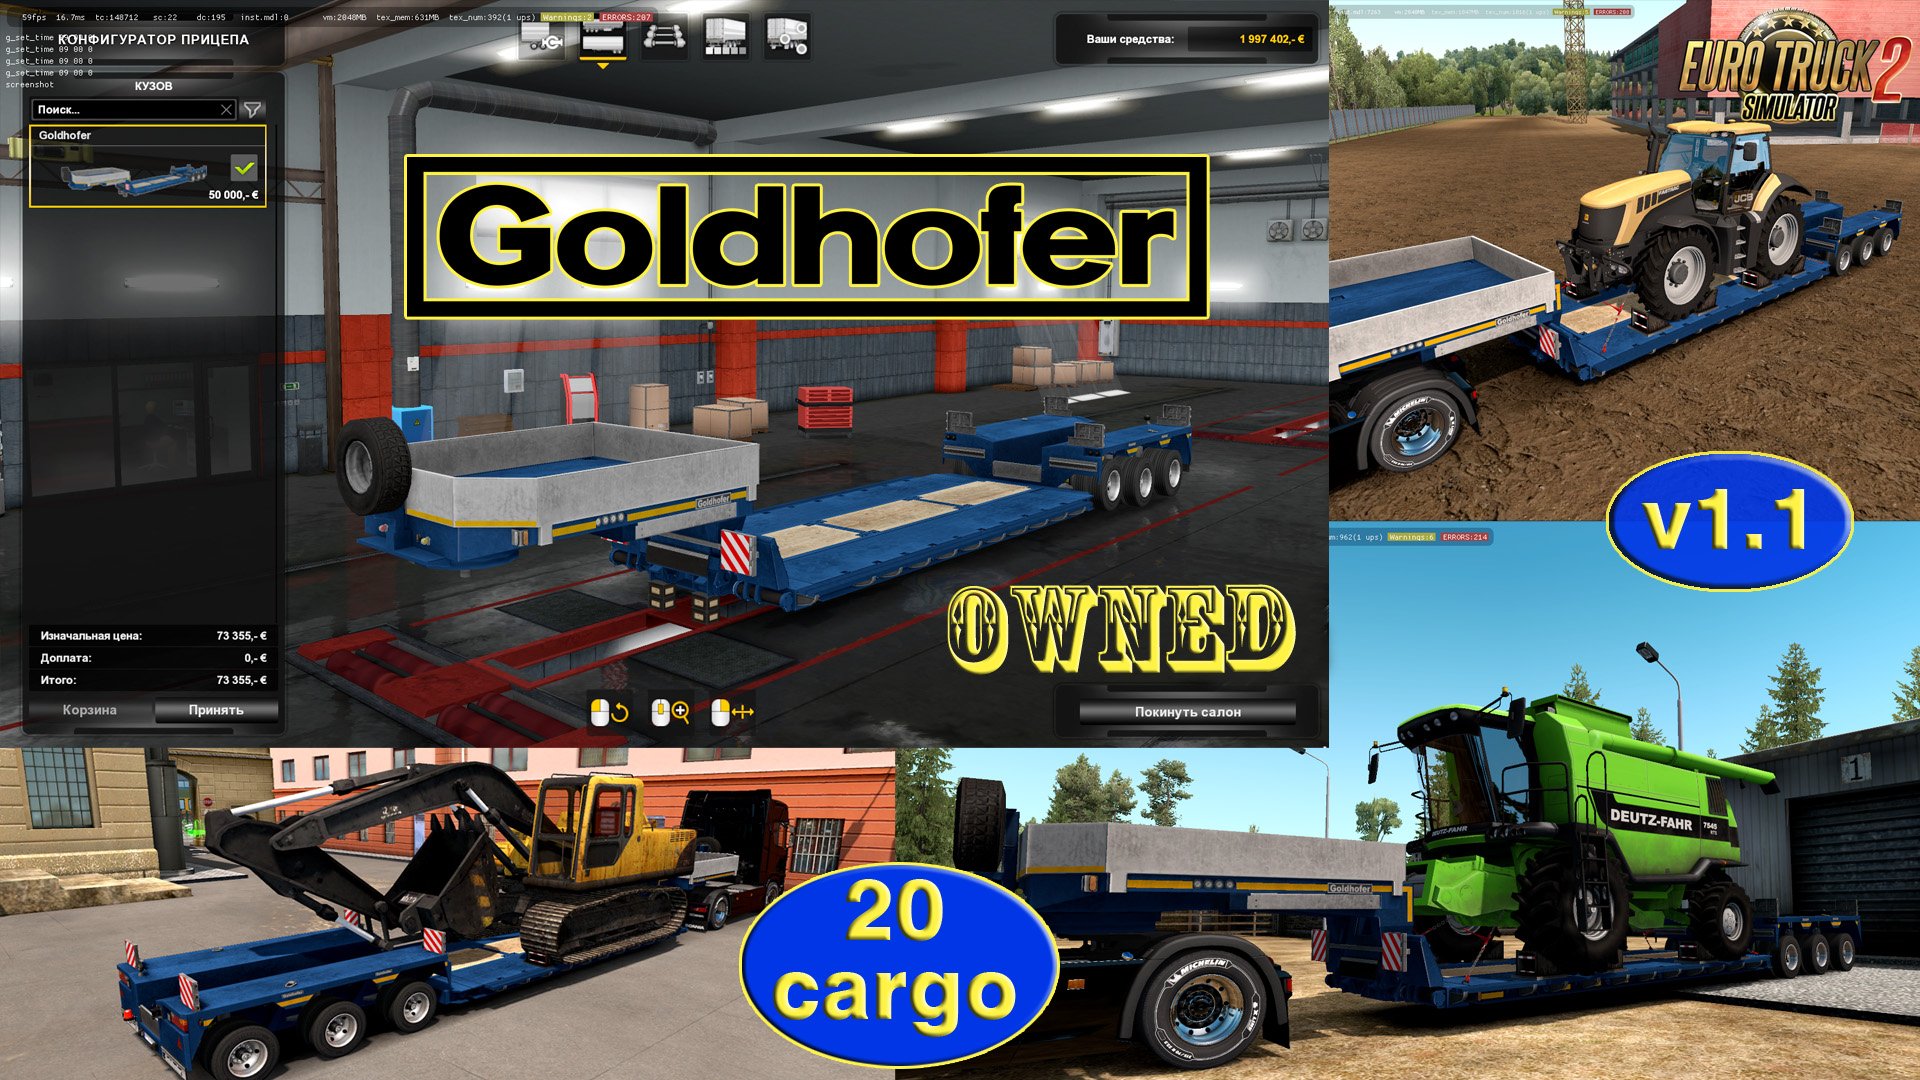 Ownable trailer Goldhofer v1.1 by Jazzycat